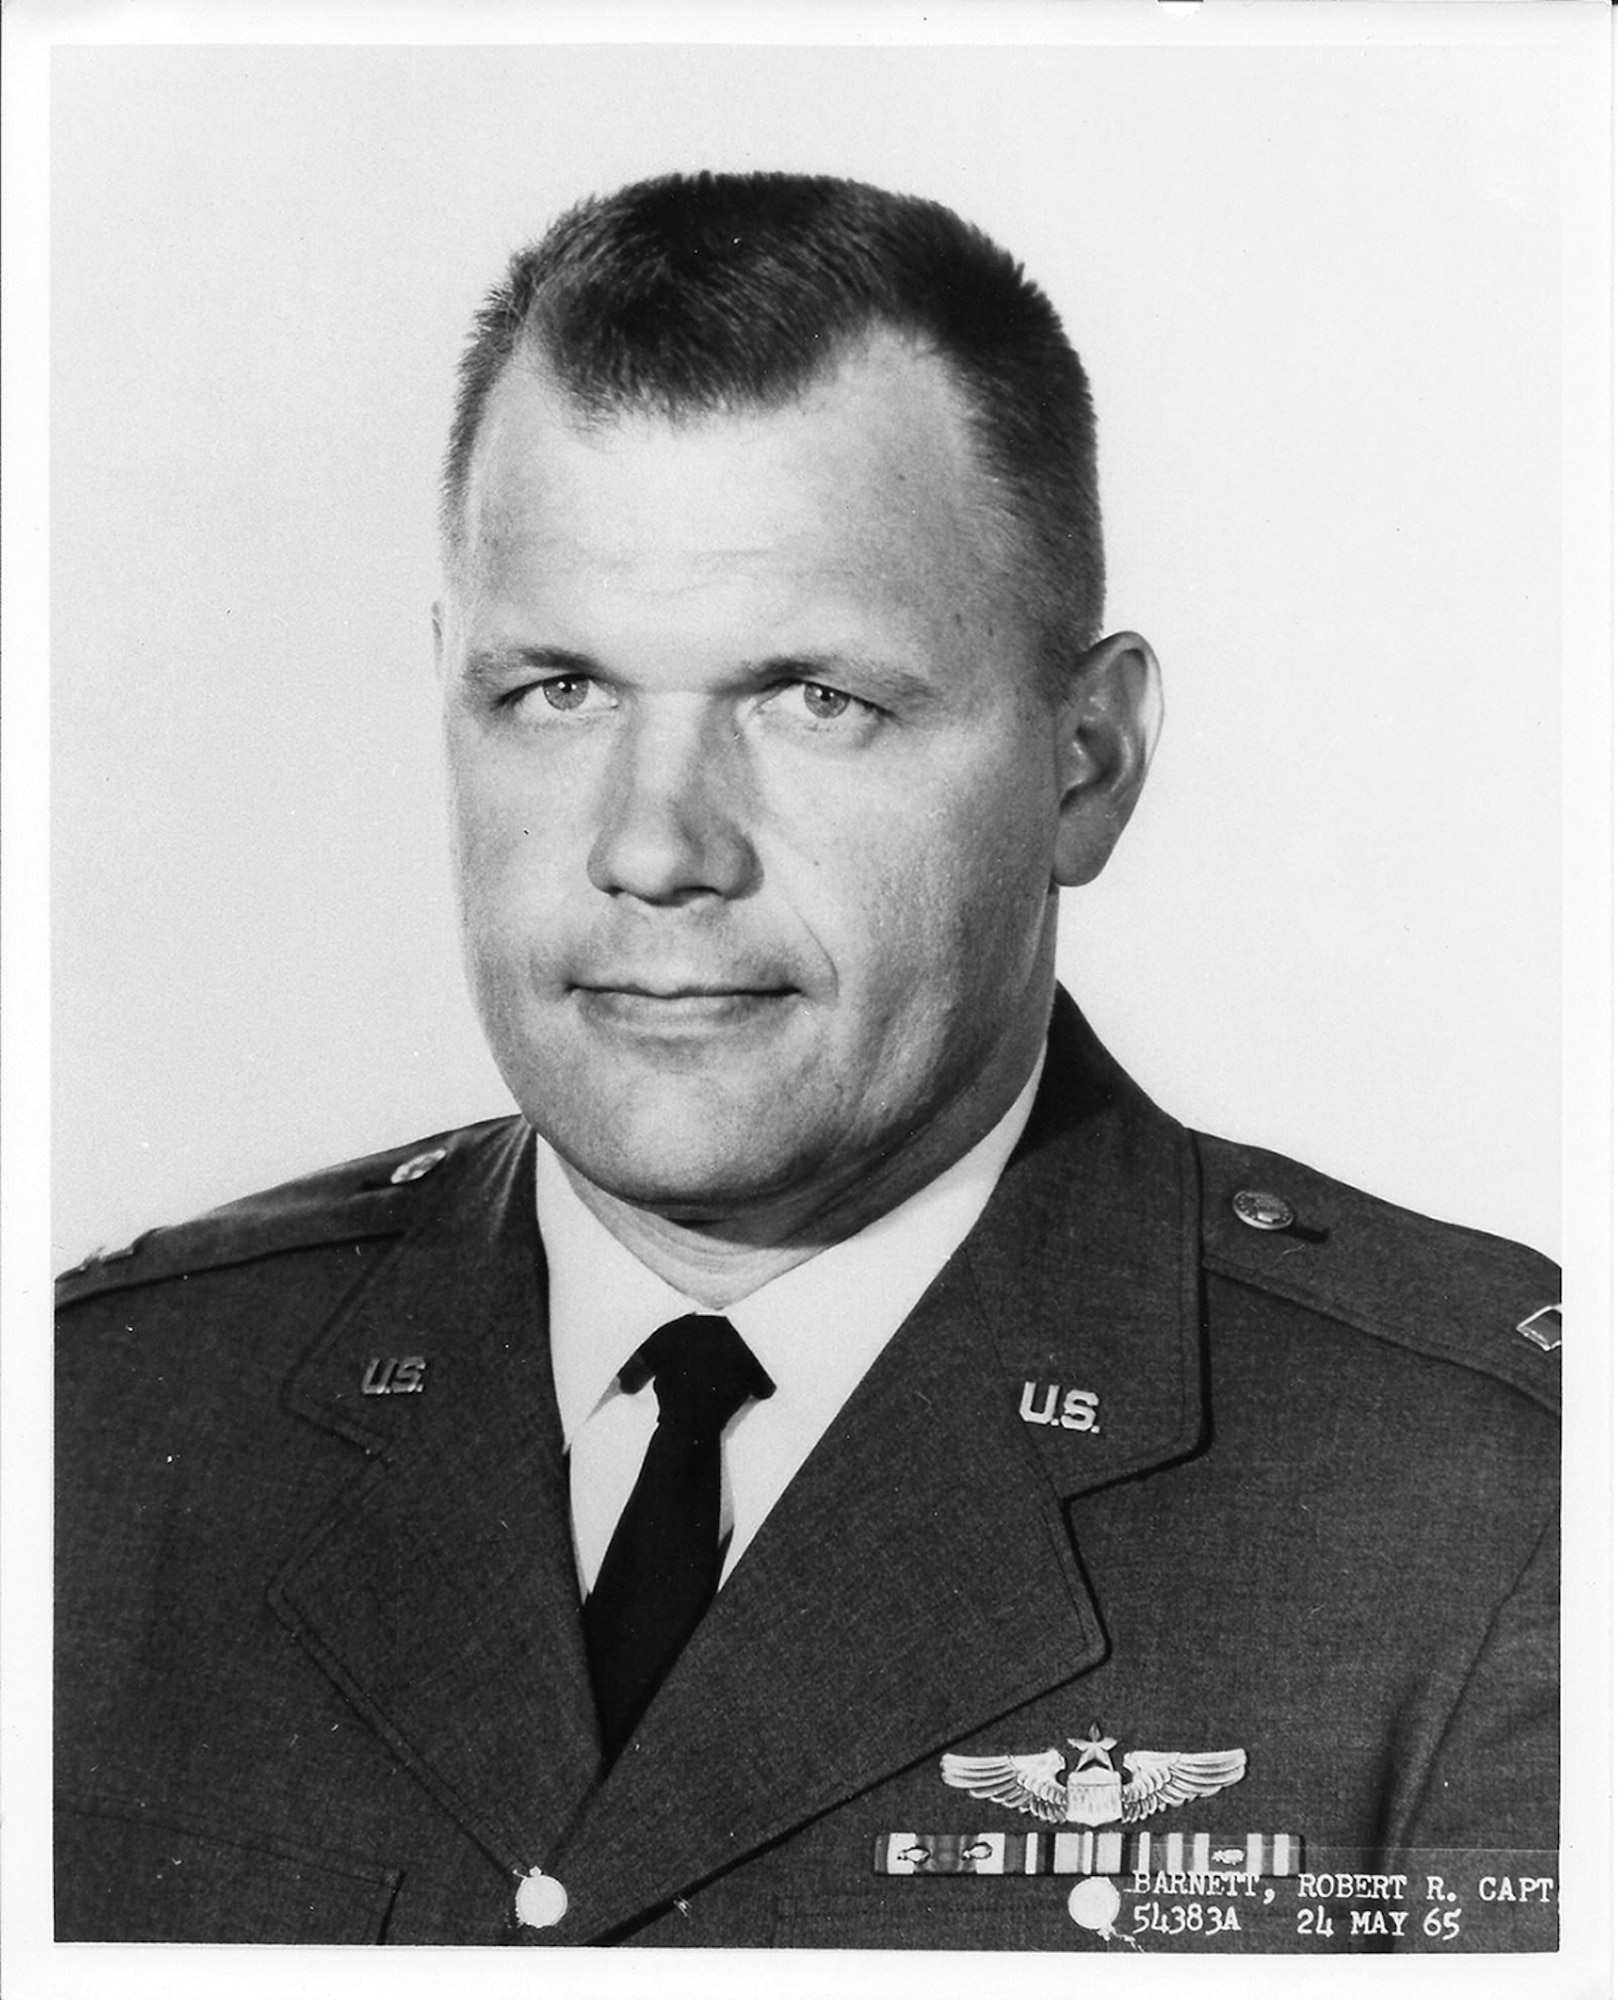 On April 7, 1966, Air Force Capt. Robert Barnett was the pilot of a B-57B Canberra on a strike mission over Laos when his aircraft was hit by hostile ground fire and crashed.  Barnett was declared killed in action. After his remains were recently recovered, the Texas native was laid to rest April 7, 2017, at the Texas State Cemetery in Austin, Texas. (U.S. Air Force courtesy photo)